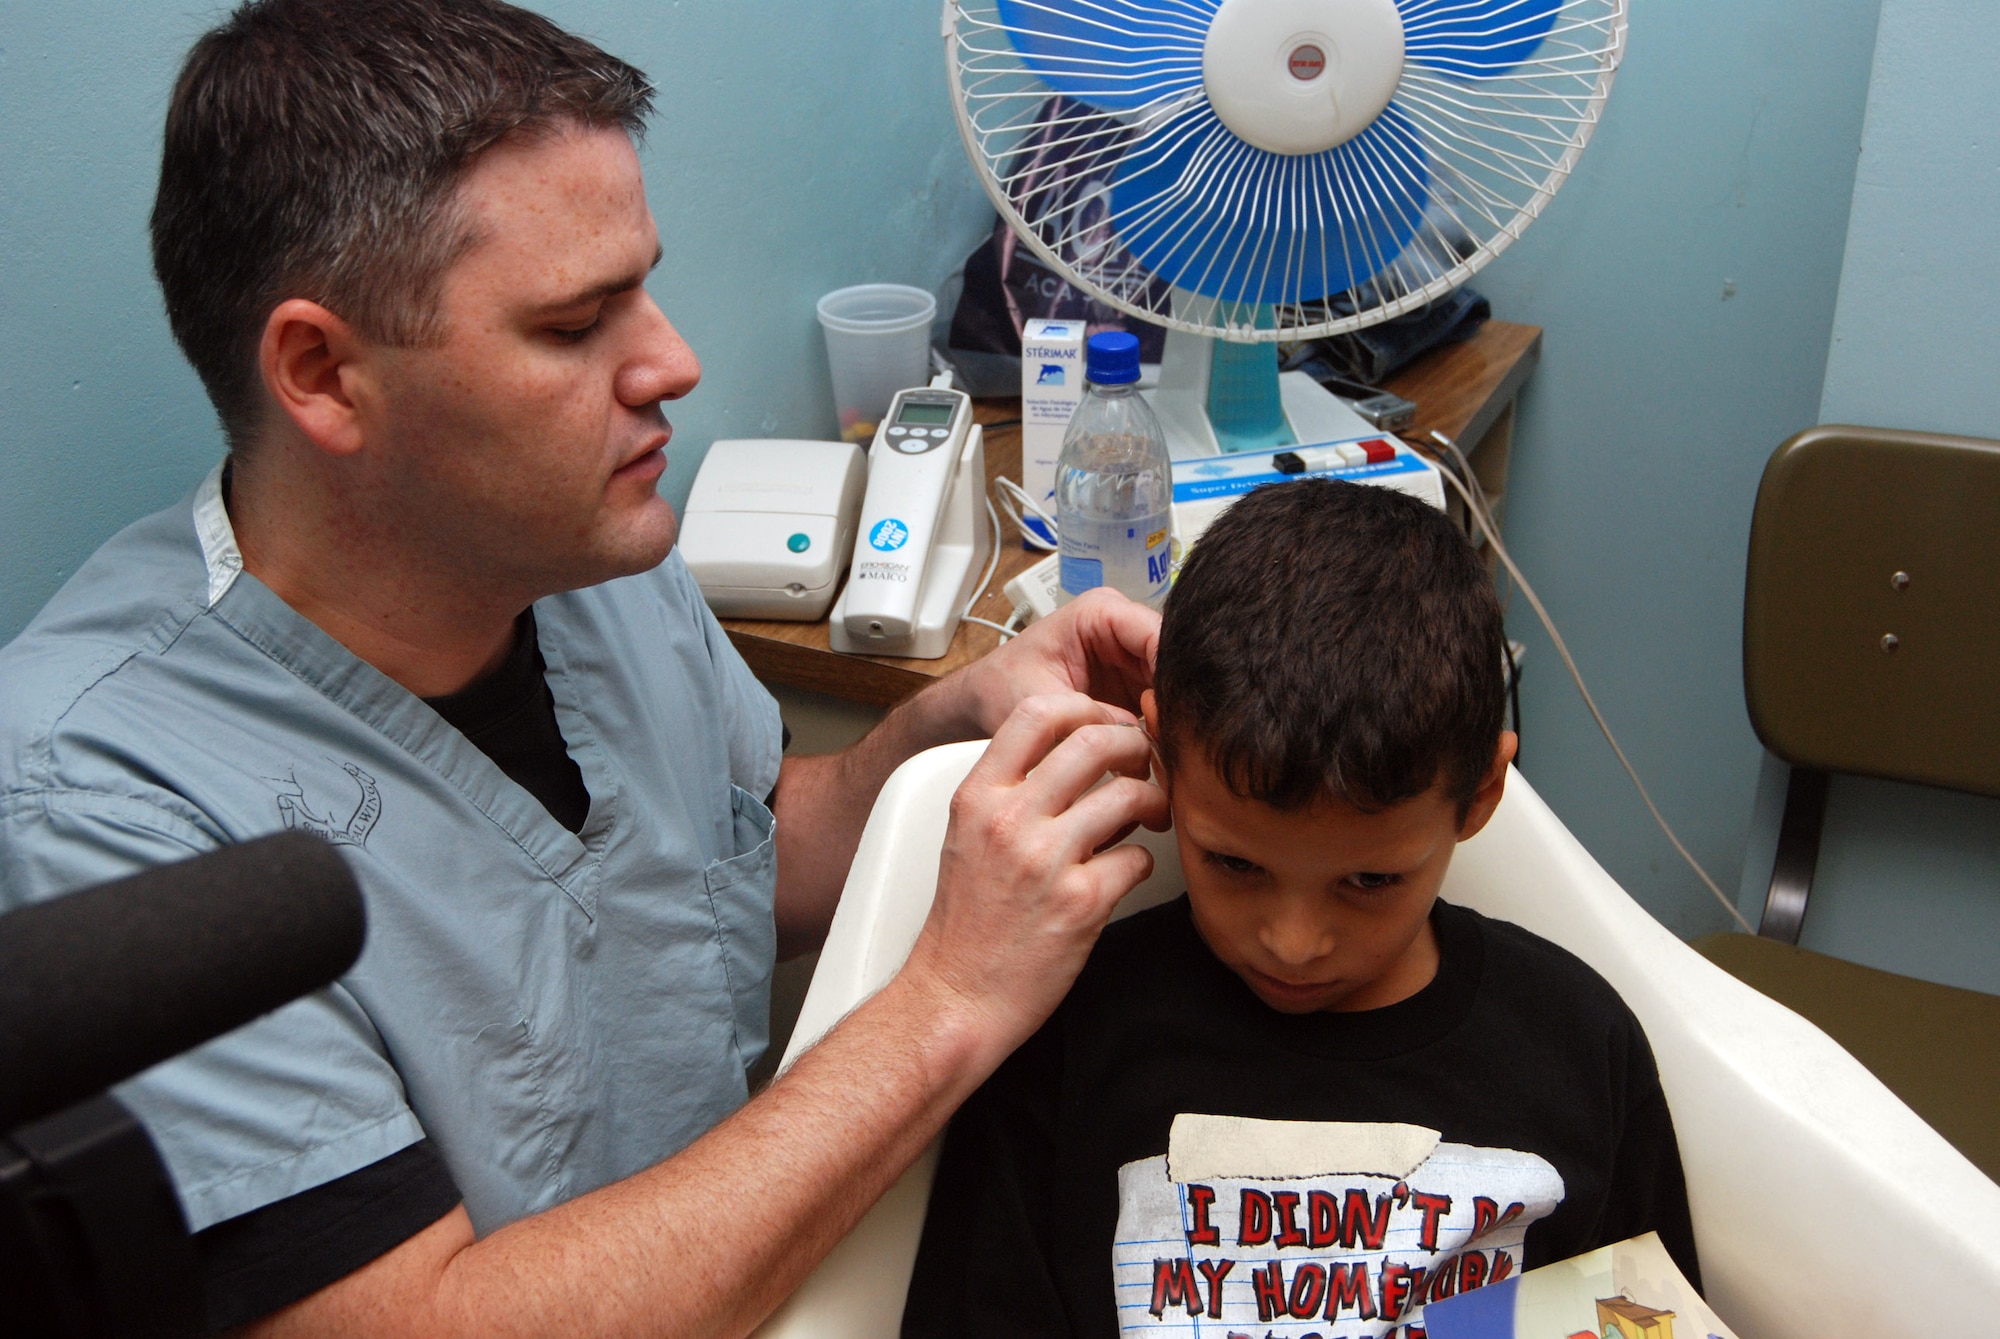 Capt. Matt Williams treats a young patient June 17at Hospital Escuela in Tegucigalpa, Honduras. The audiology team performed more than 160 hearing tests and fitted more than 50 hearing aids during their a two-week readiness training mission to the hospital. Captain Williams an audiologist from Wilford Hall Medical Center in San Antonio, Texas. (U.S. Air Force photo/Tech. Sgt. John Asselin) 